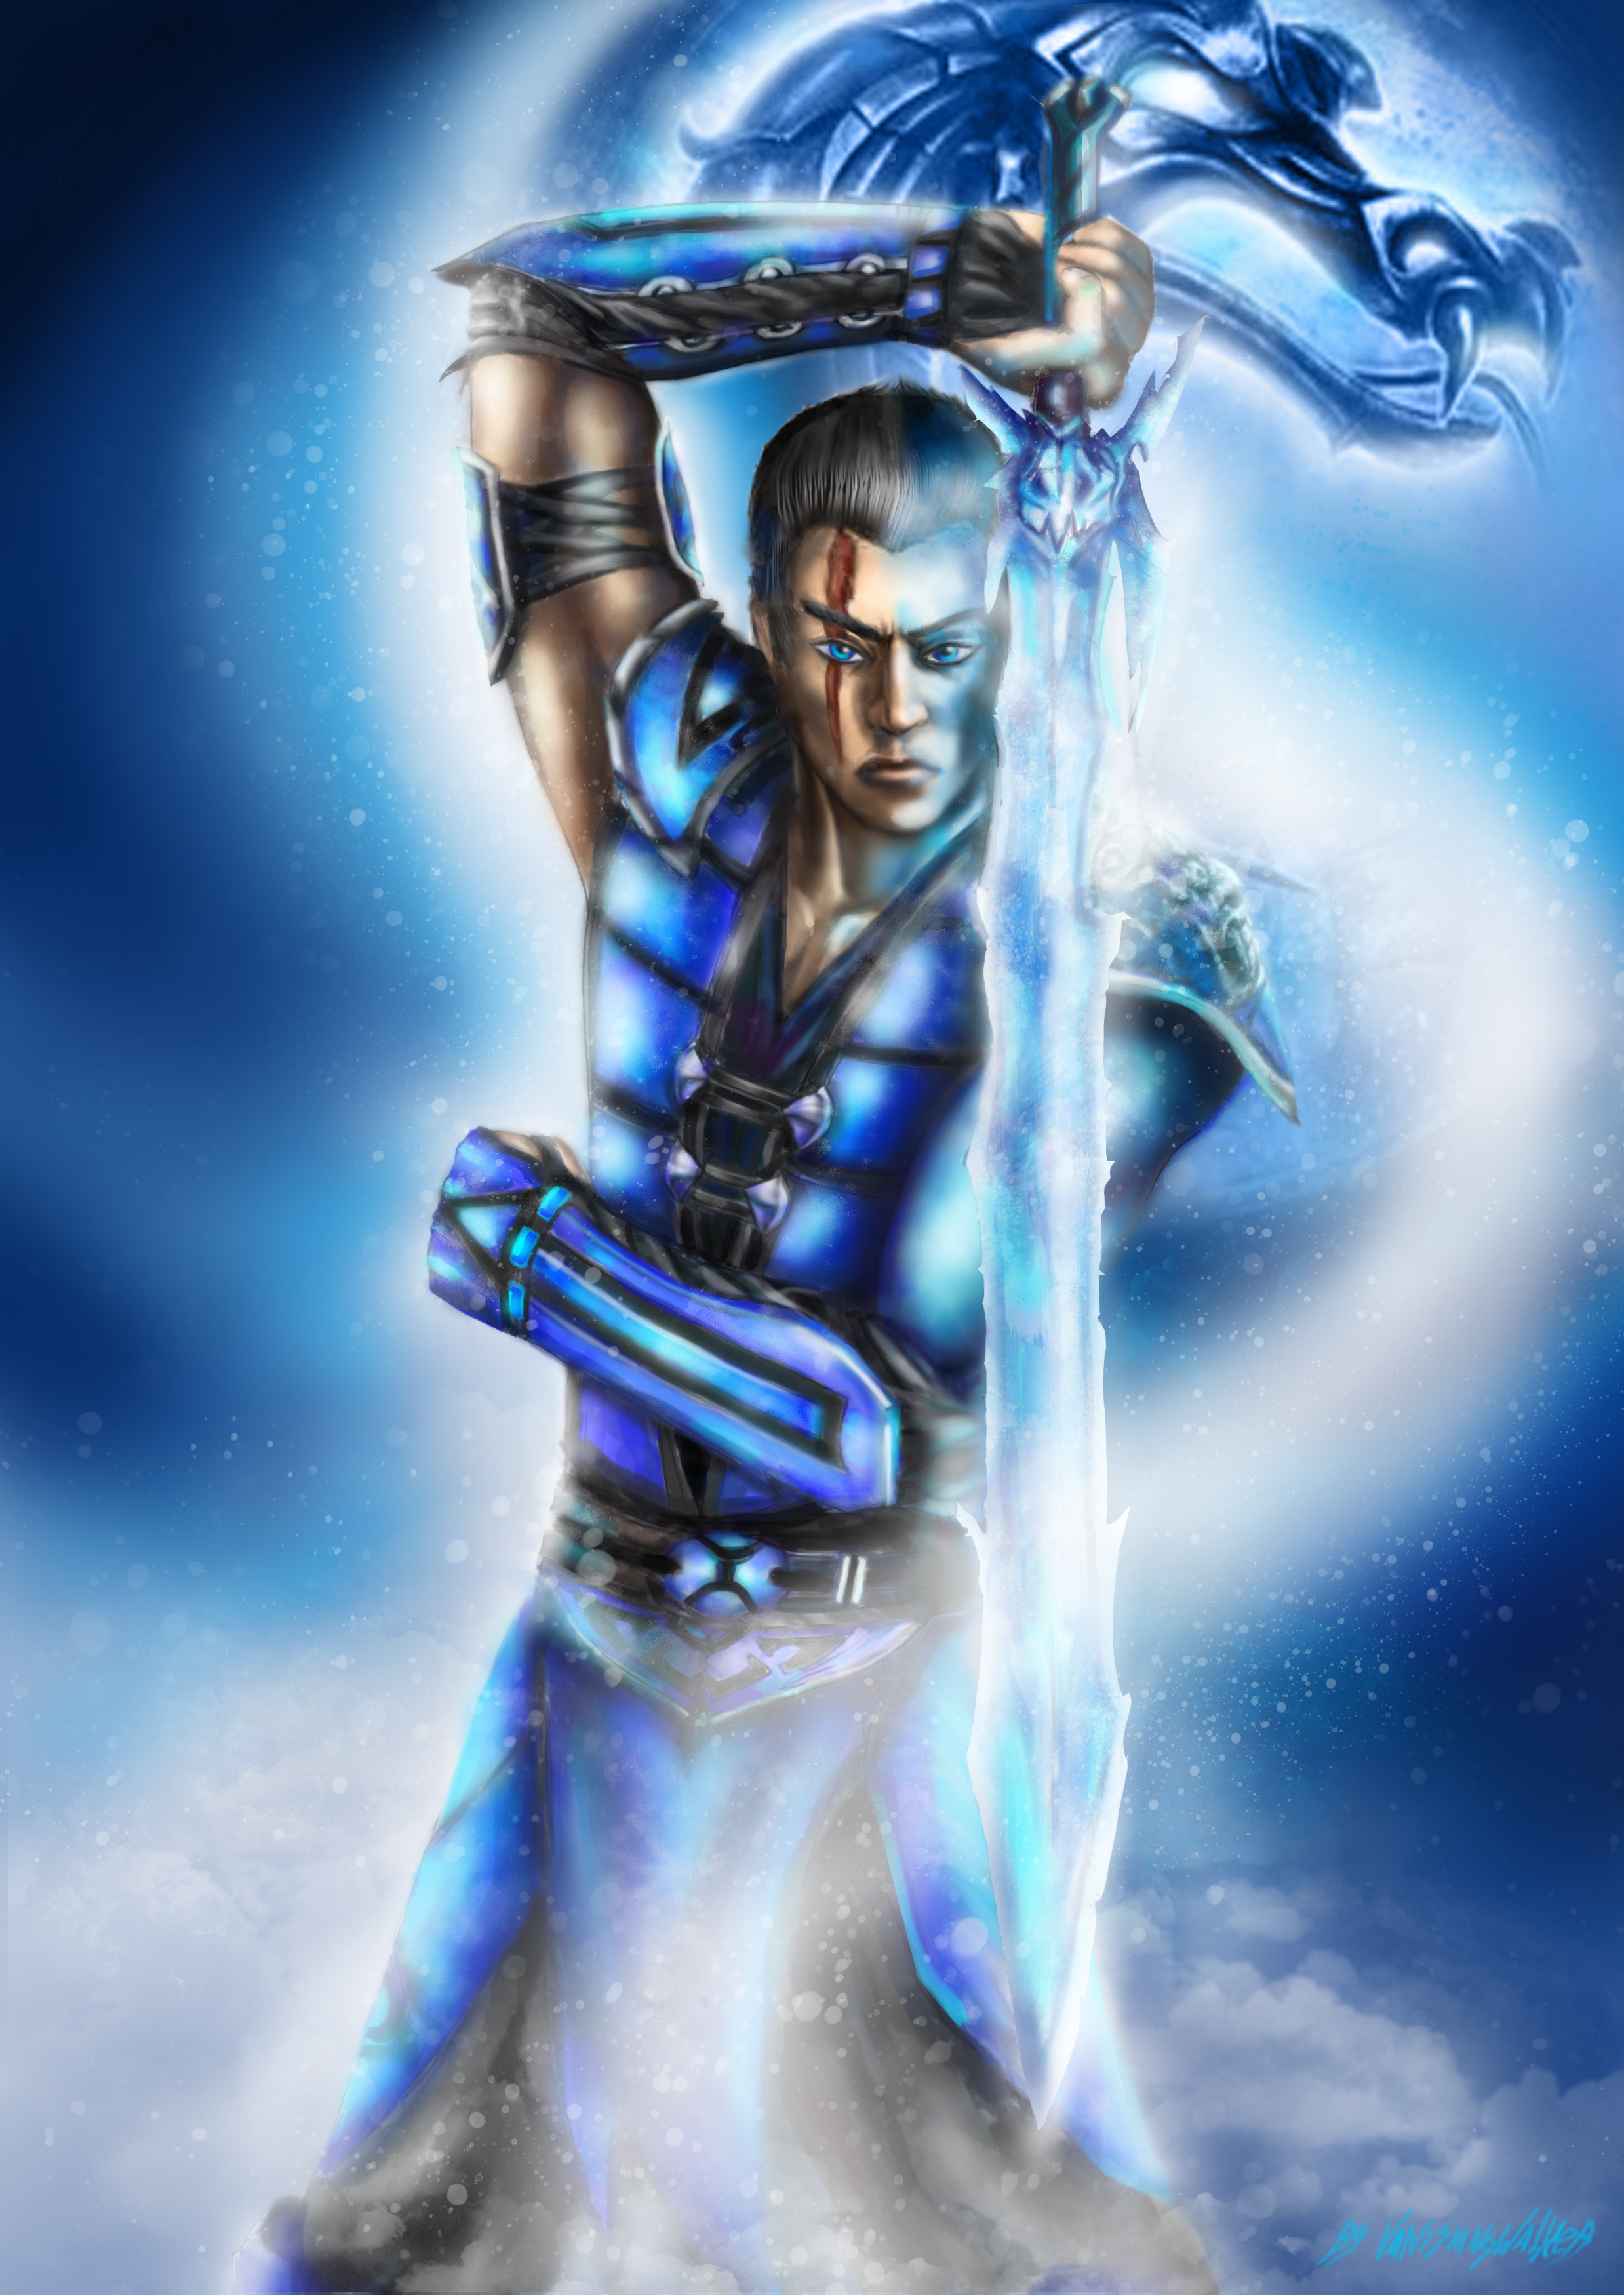 Kuai Liang or Sub-Zero Jr. and like always with some re-design of outfit. 